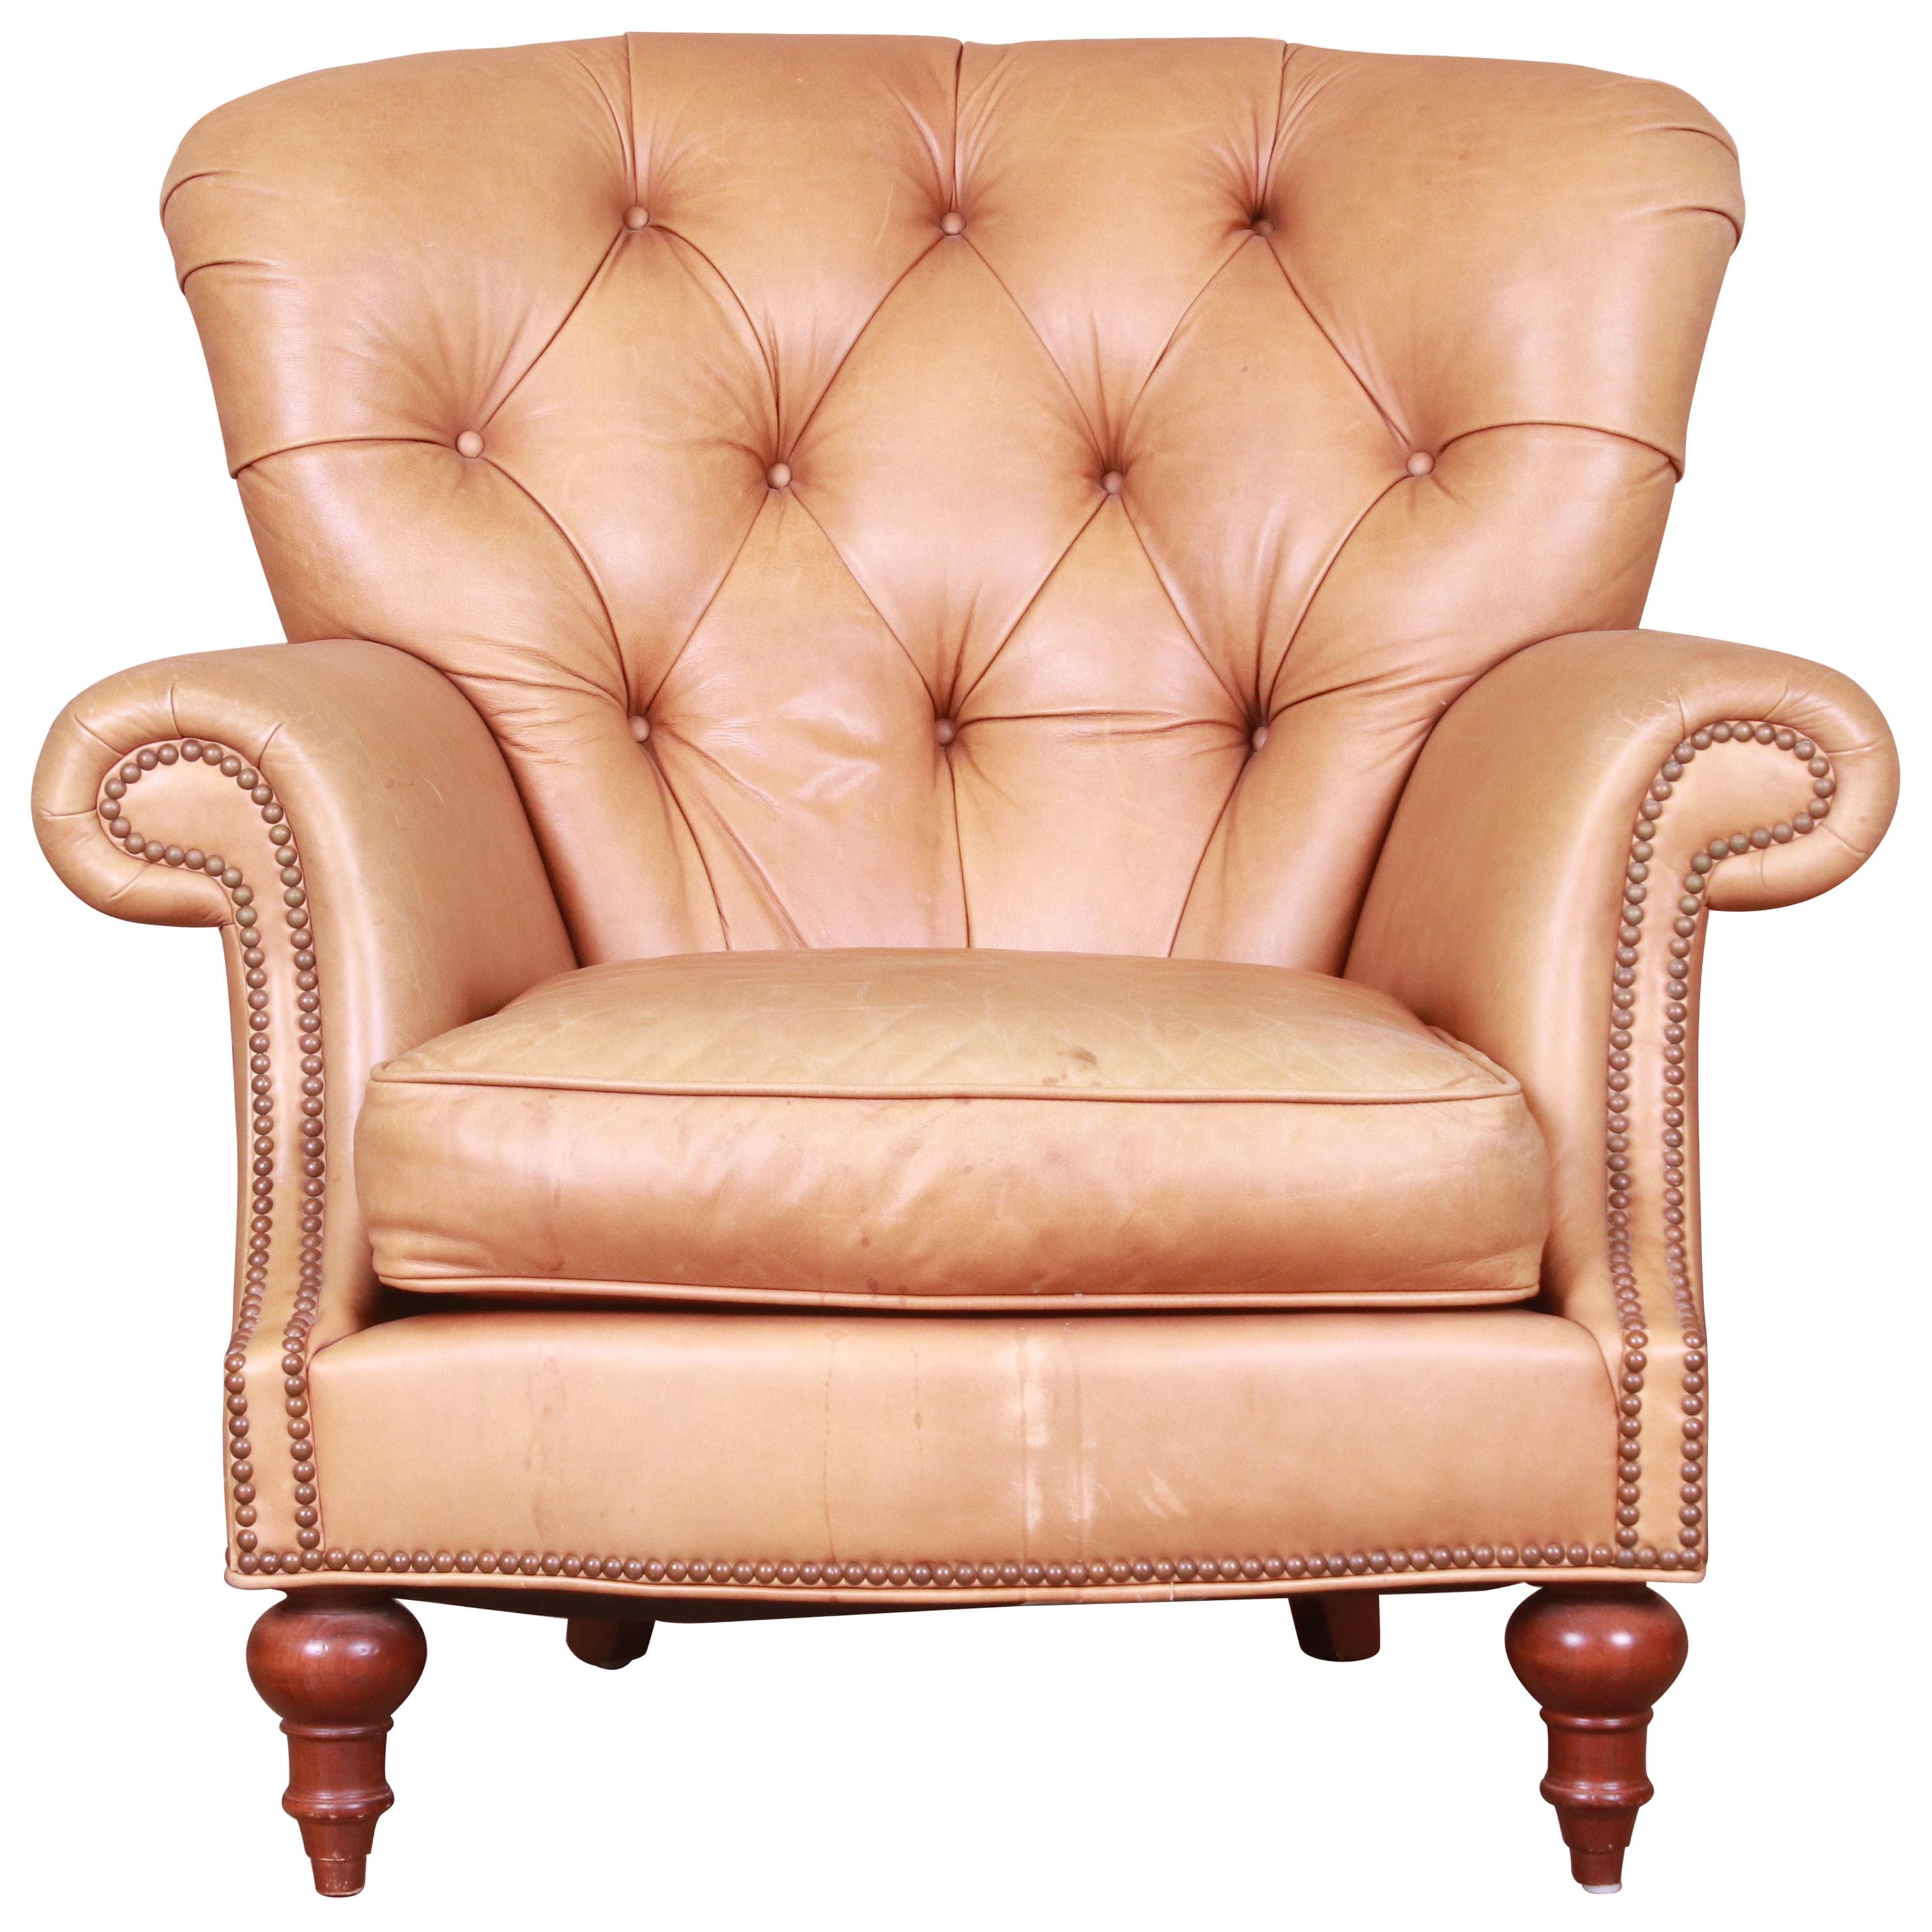 Century Furniture Tufted Leather Chesterfield Lounge Chair